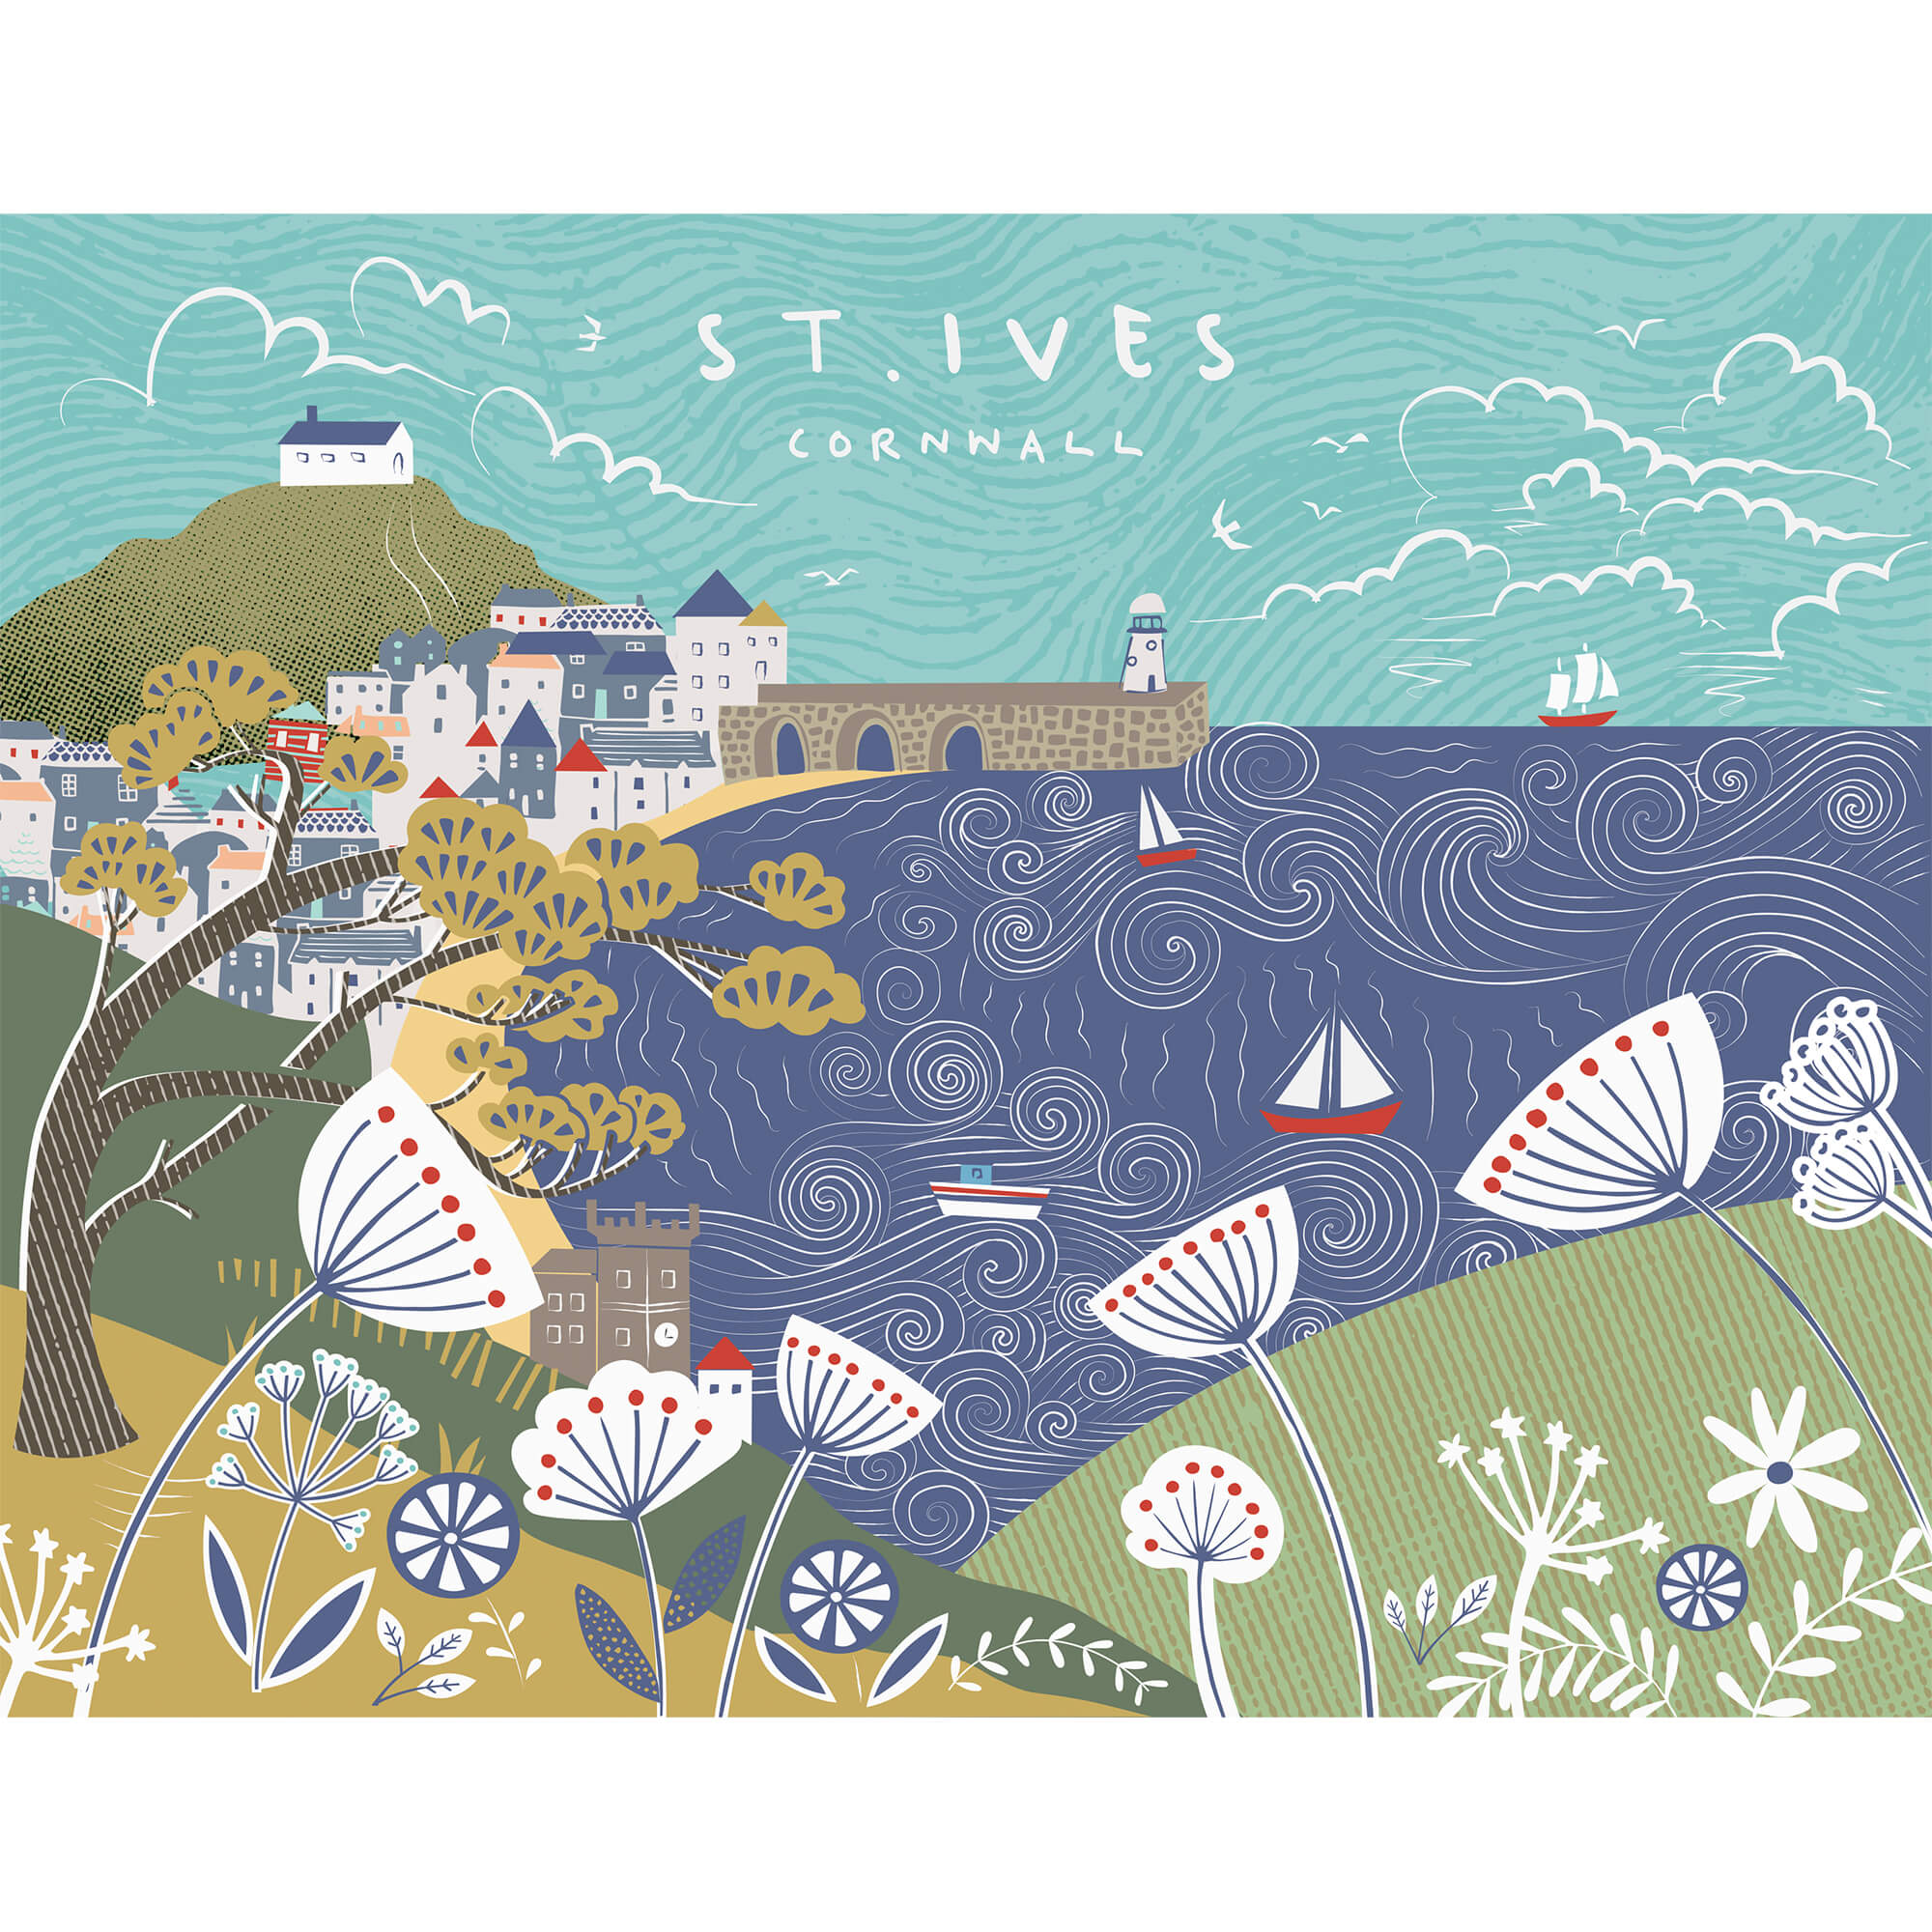 An image of The Bay St Ives Writing Small Art Print Whistlefish